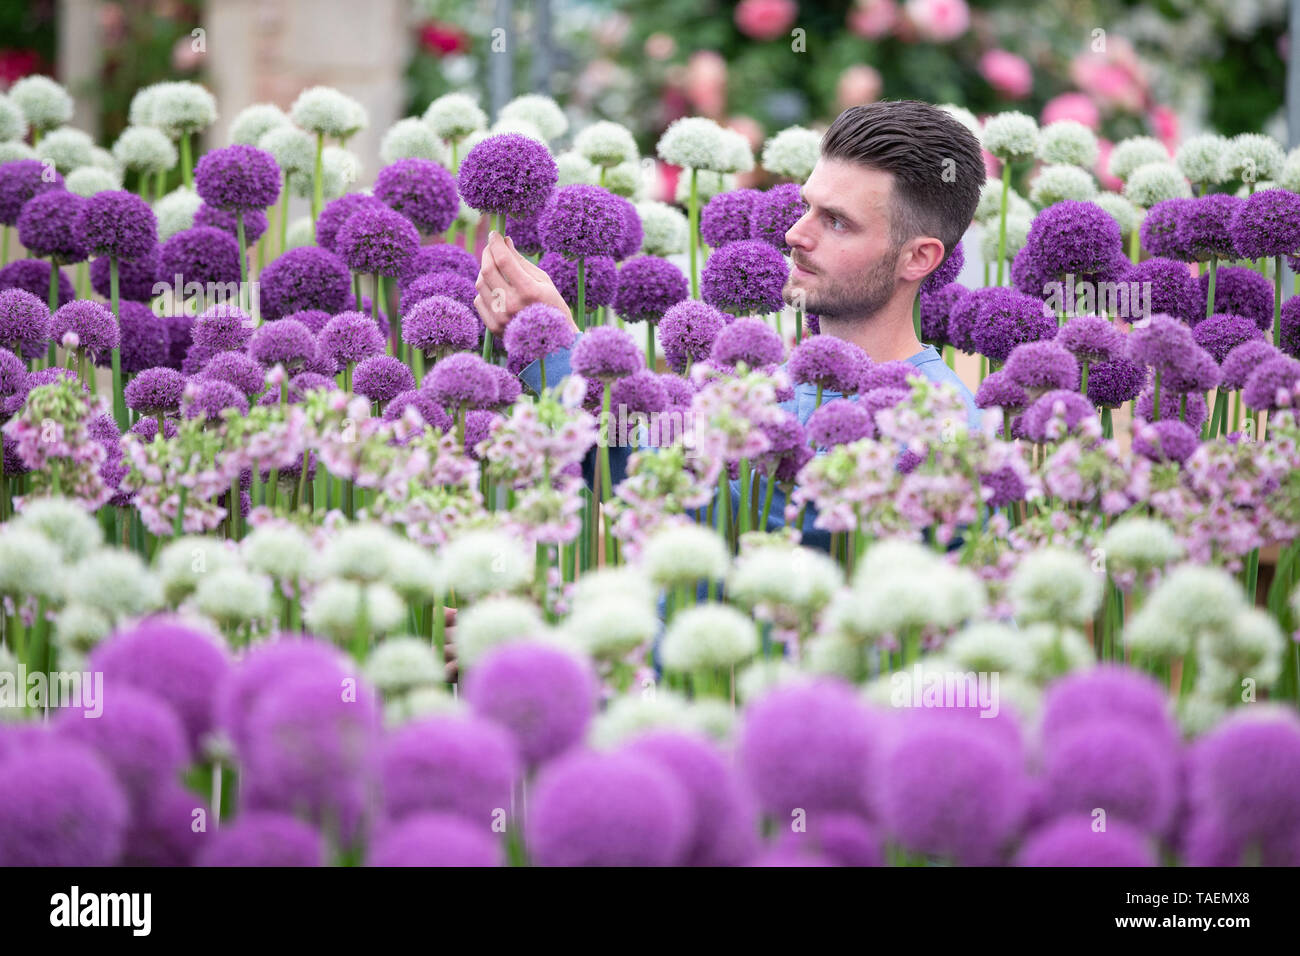 One of the exhibitors makes some final adjustments to his display of Alliums at the RHS Chelsea Flower Show. Stock Photo